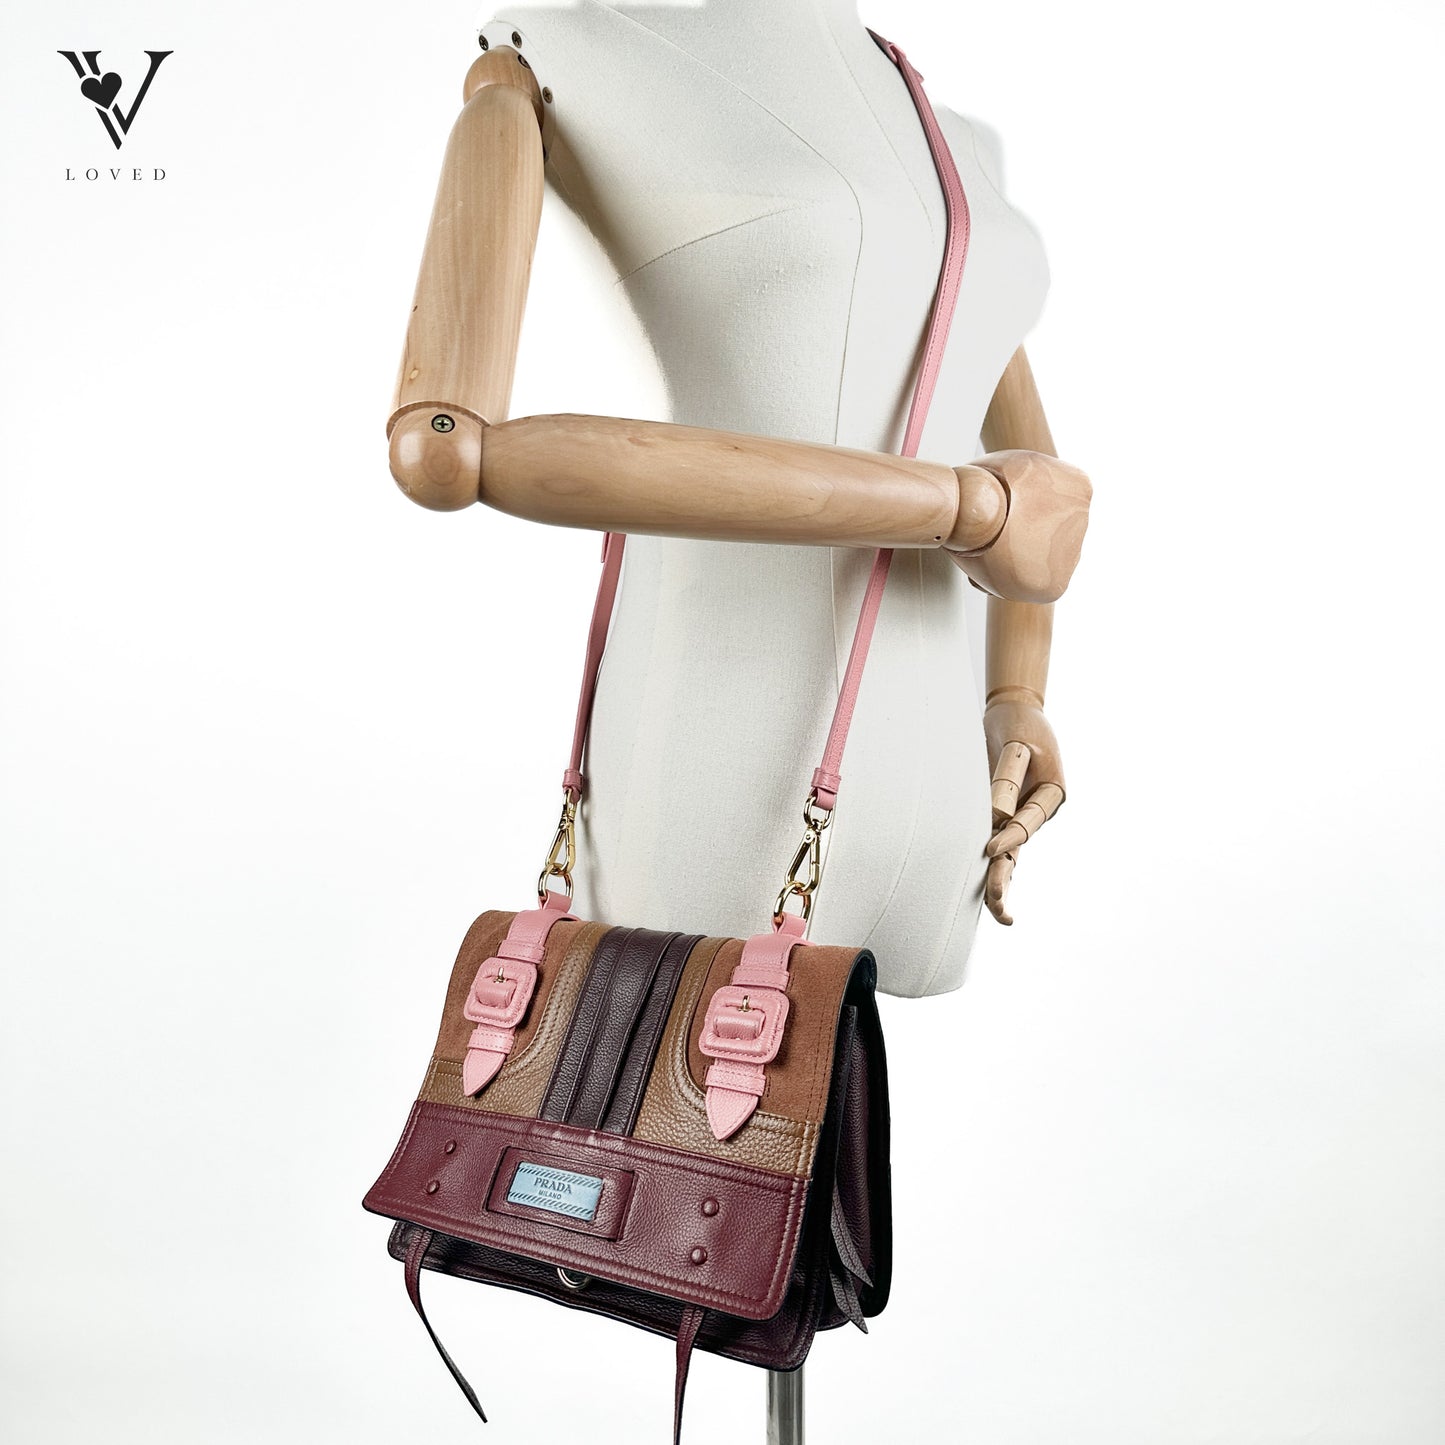 Etiquette Crossbody Bag in Glace Calfskin and Suede